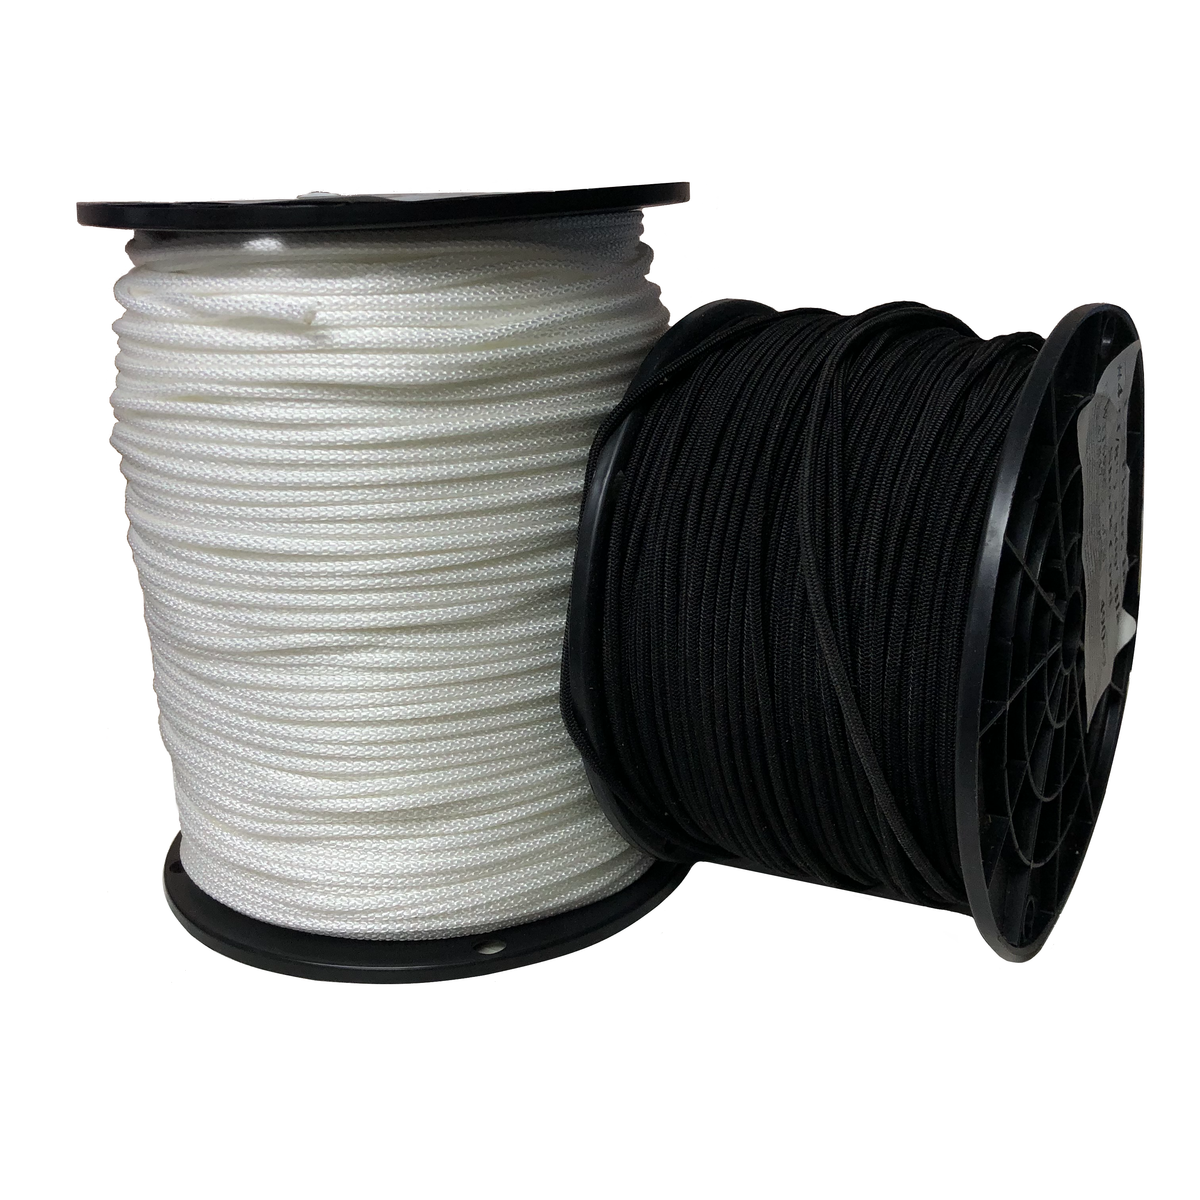 All Gear AGHBPP141000 - Rope Ppl Braided 1/4 in Dia. 1000 ft L